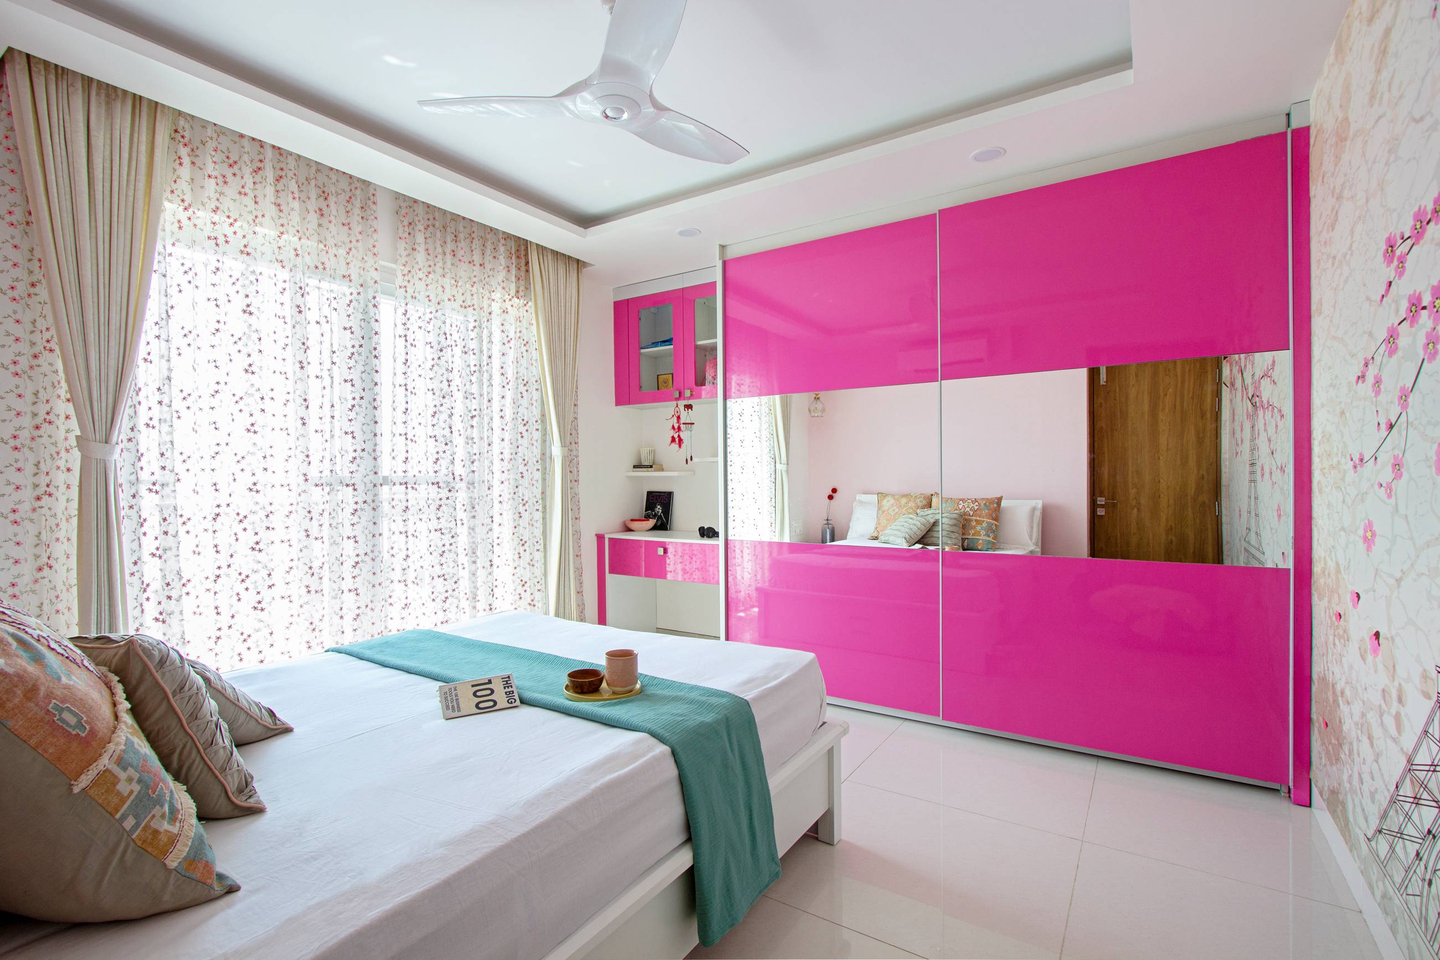 Modern Kids Bedroom Design With A Double Bed With Inbuilt Storage And Side Tables